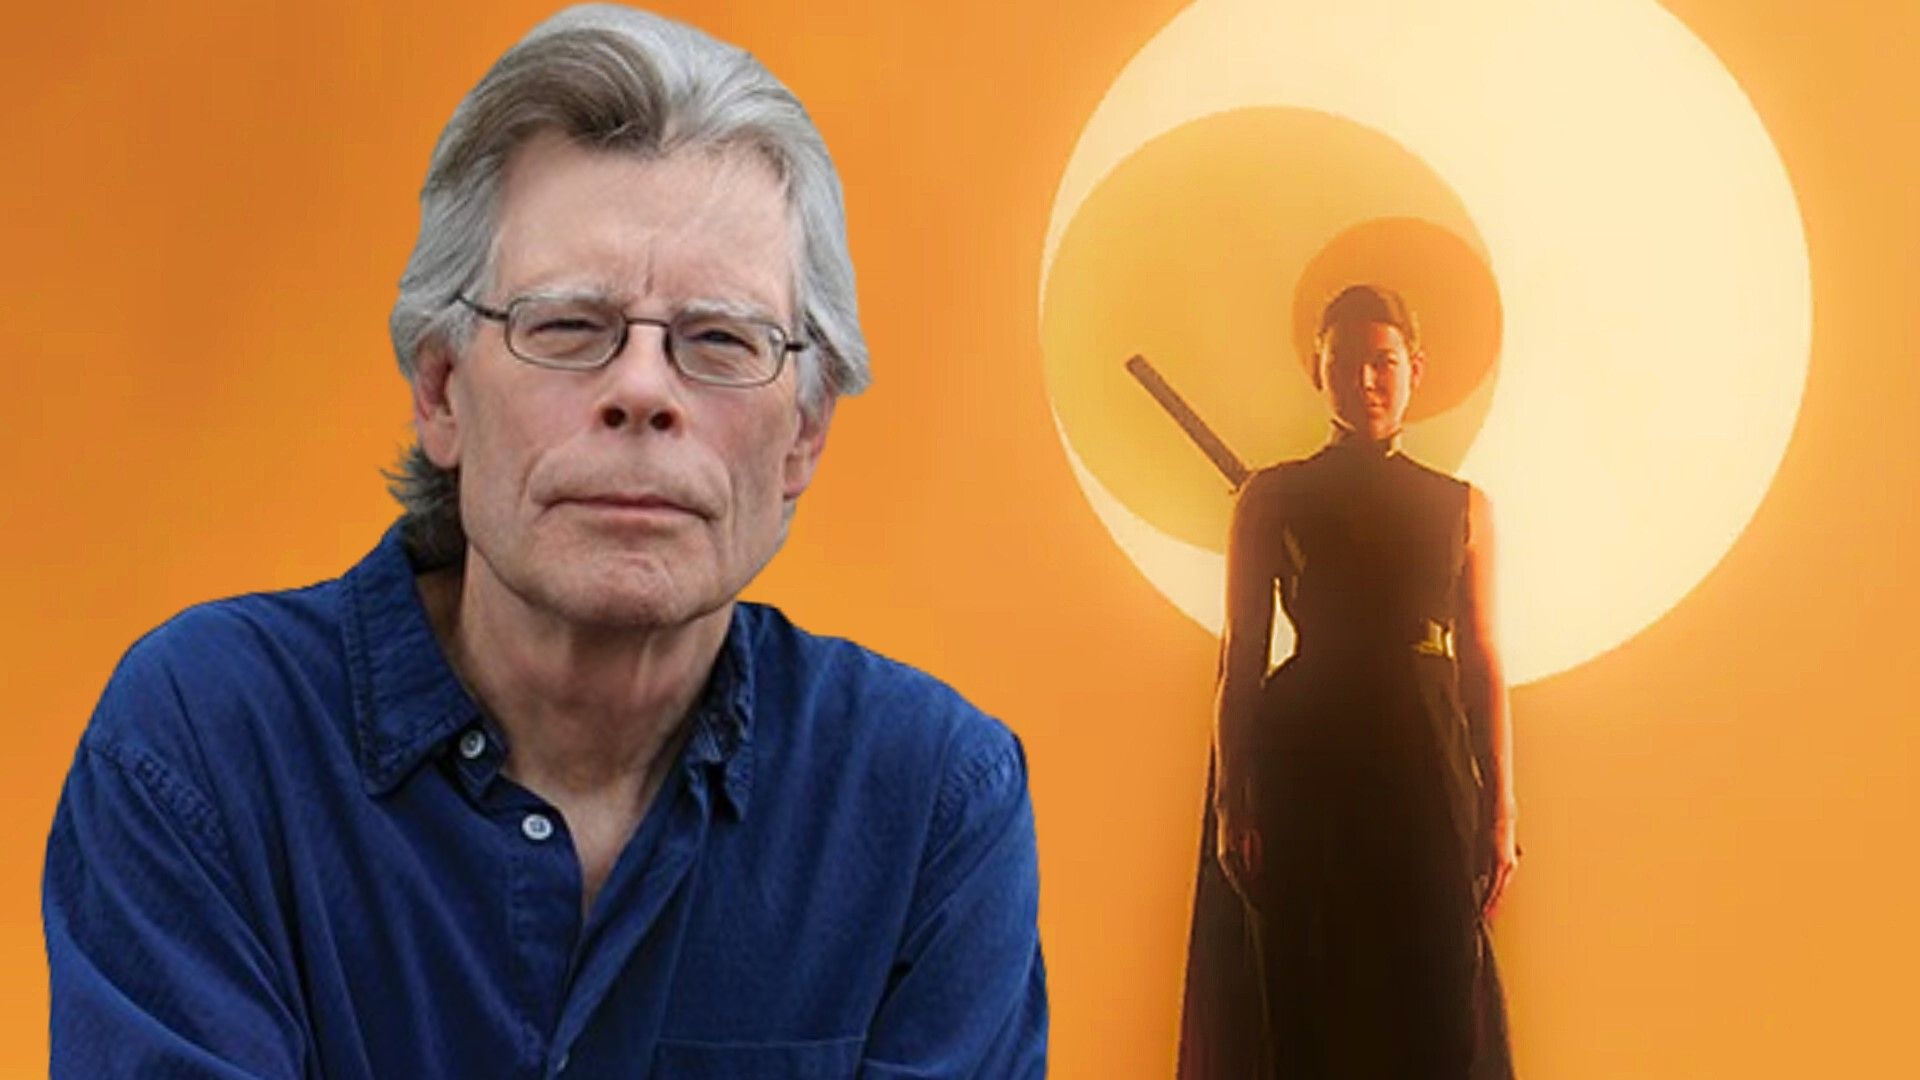 Stephen King Heaps Praise on New Netflix Sci-Fi Series: ‘Sprawling, Thought-Provoking, Immersive’